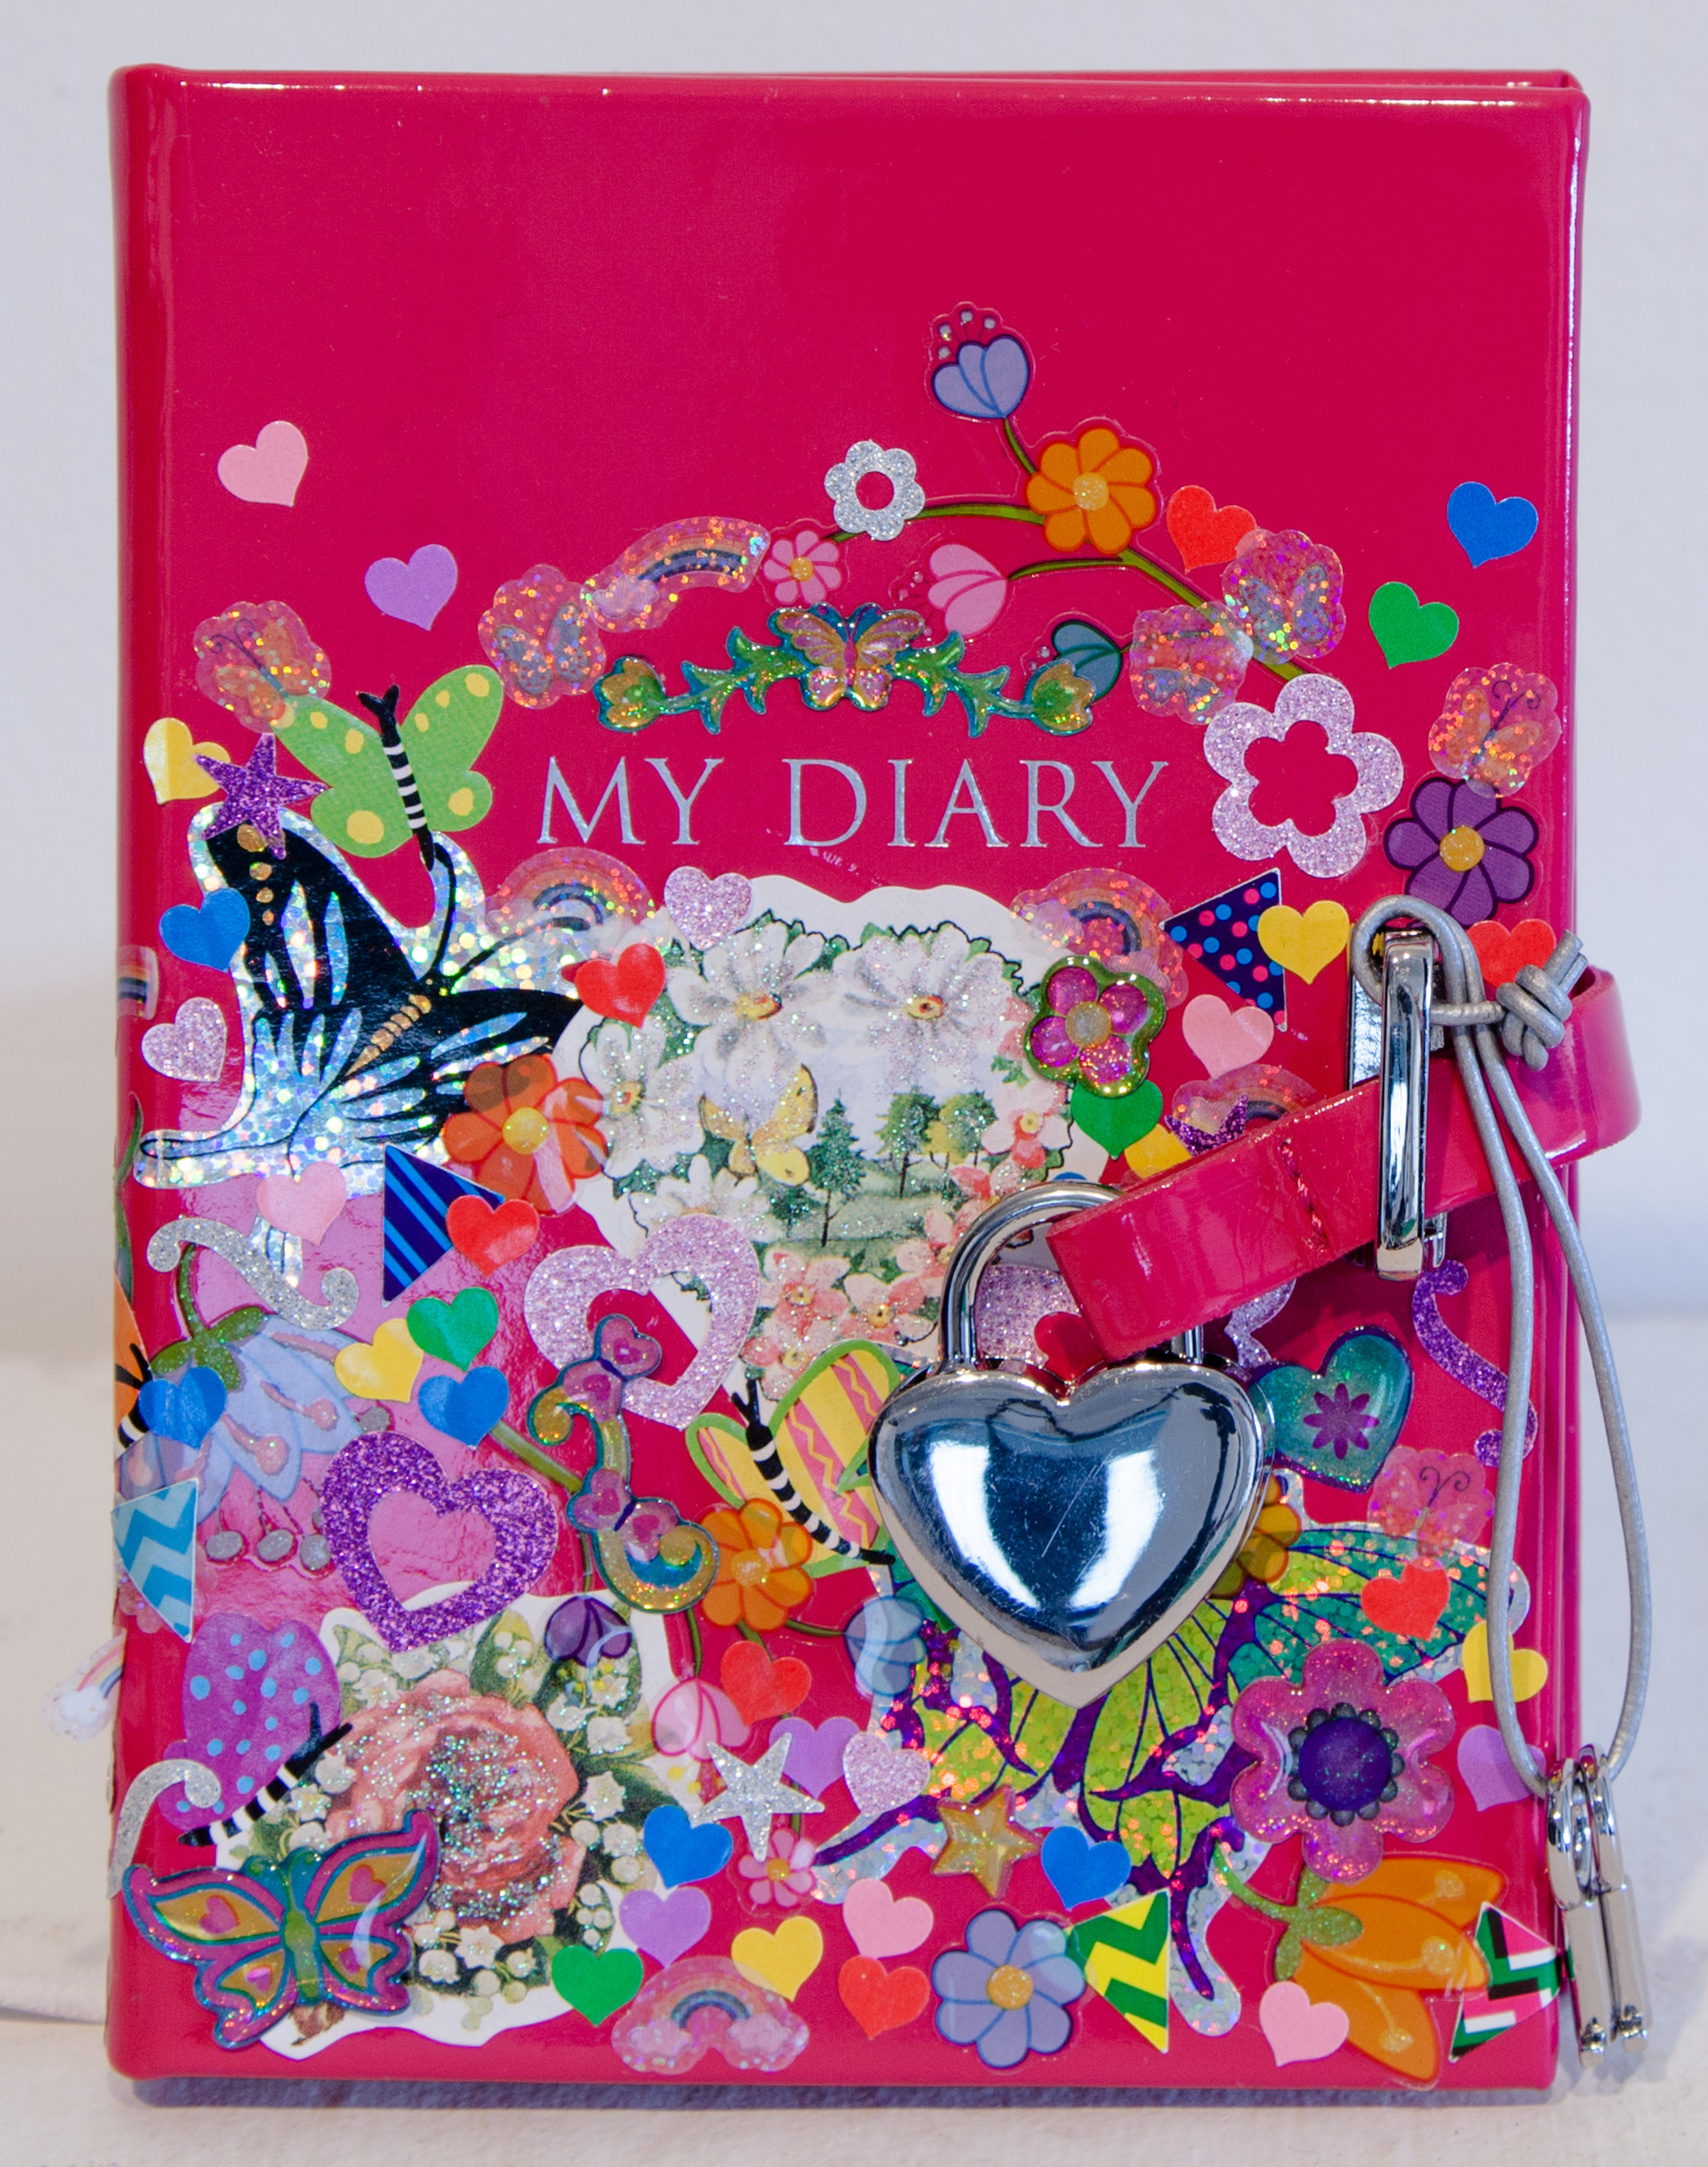    Felia (Diary, Front) ,  found patent leather pink diary, and sticker collage, 4" x 6" x 1", 2016 